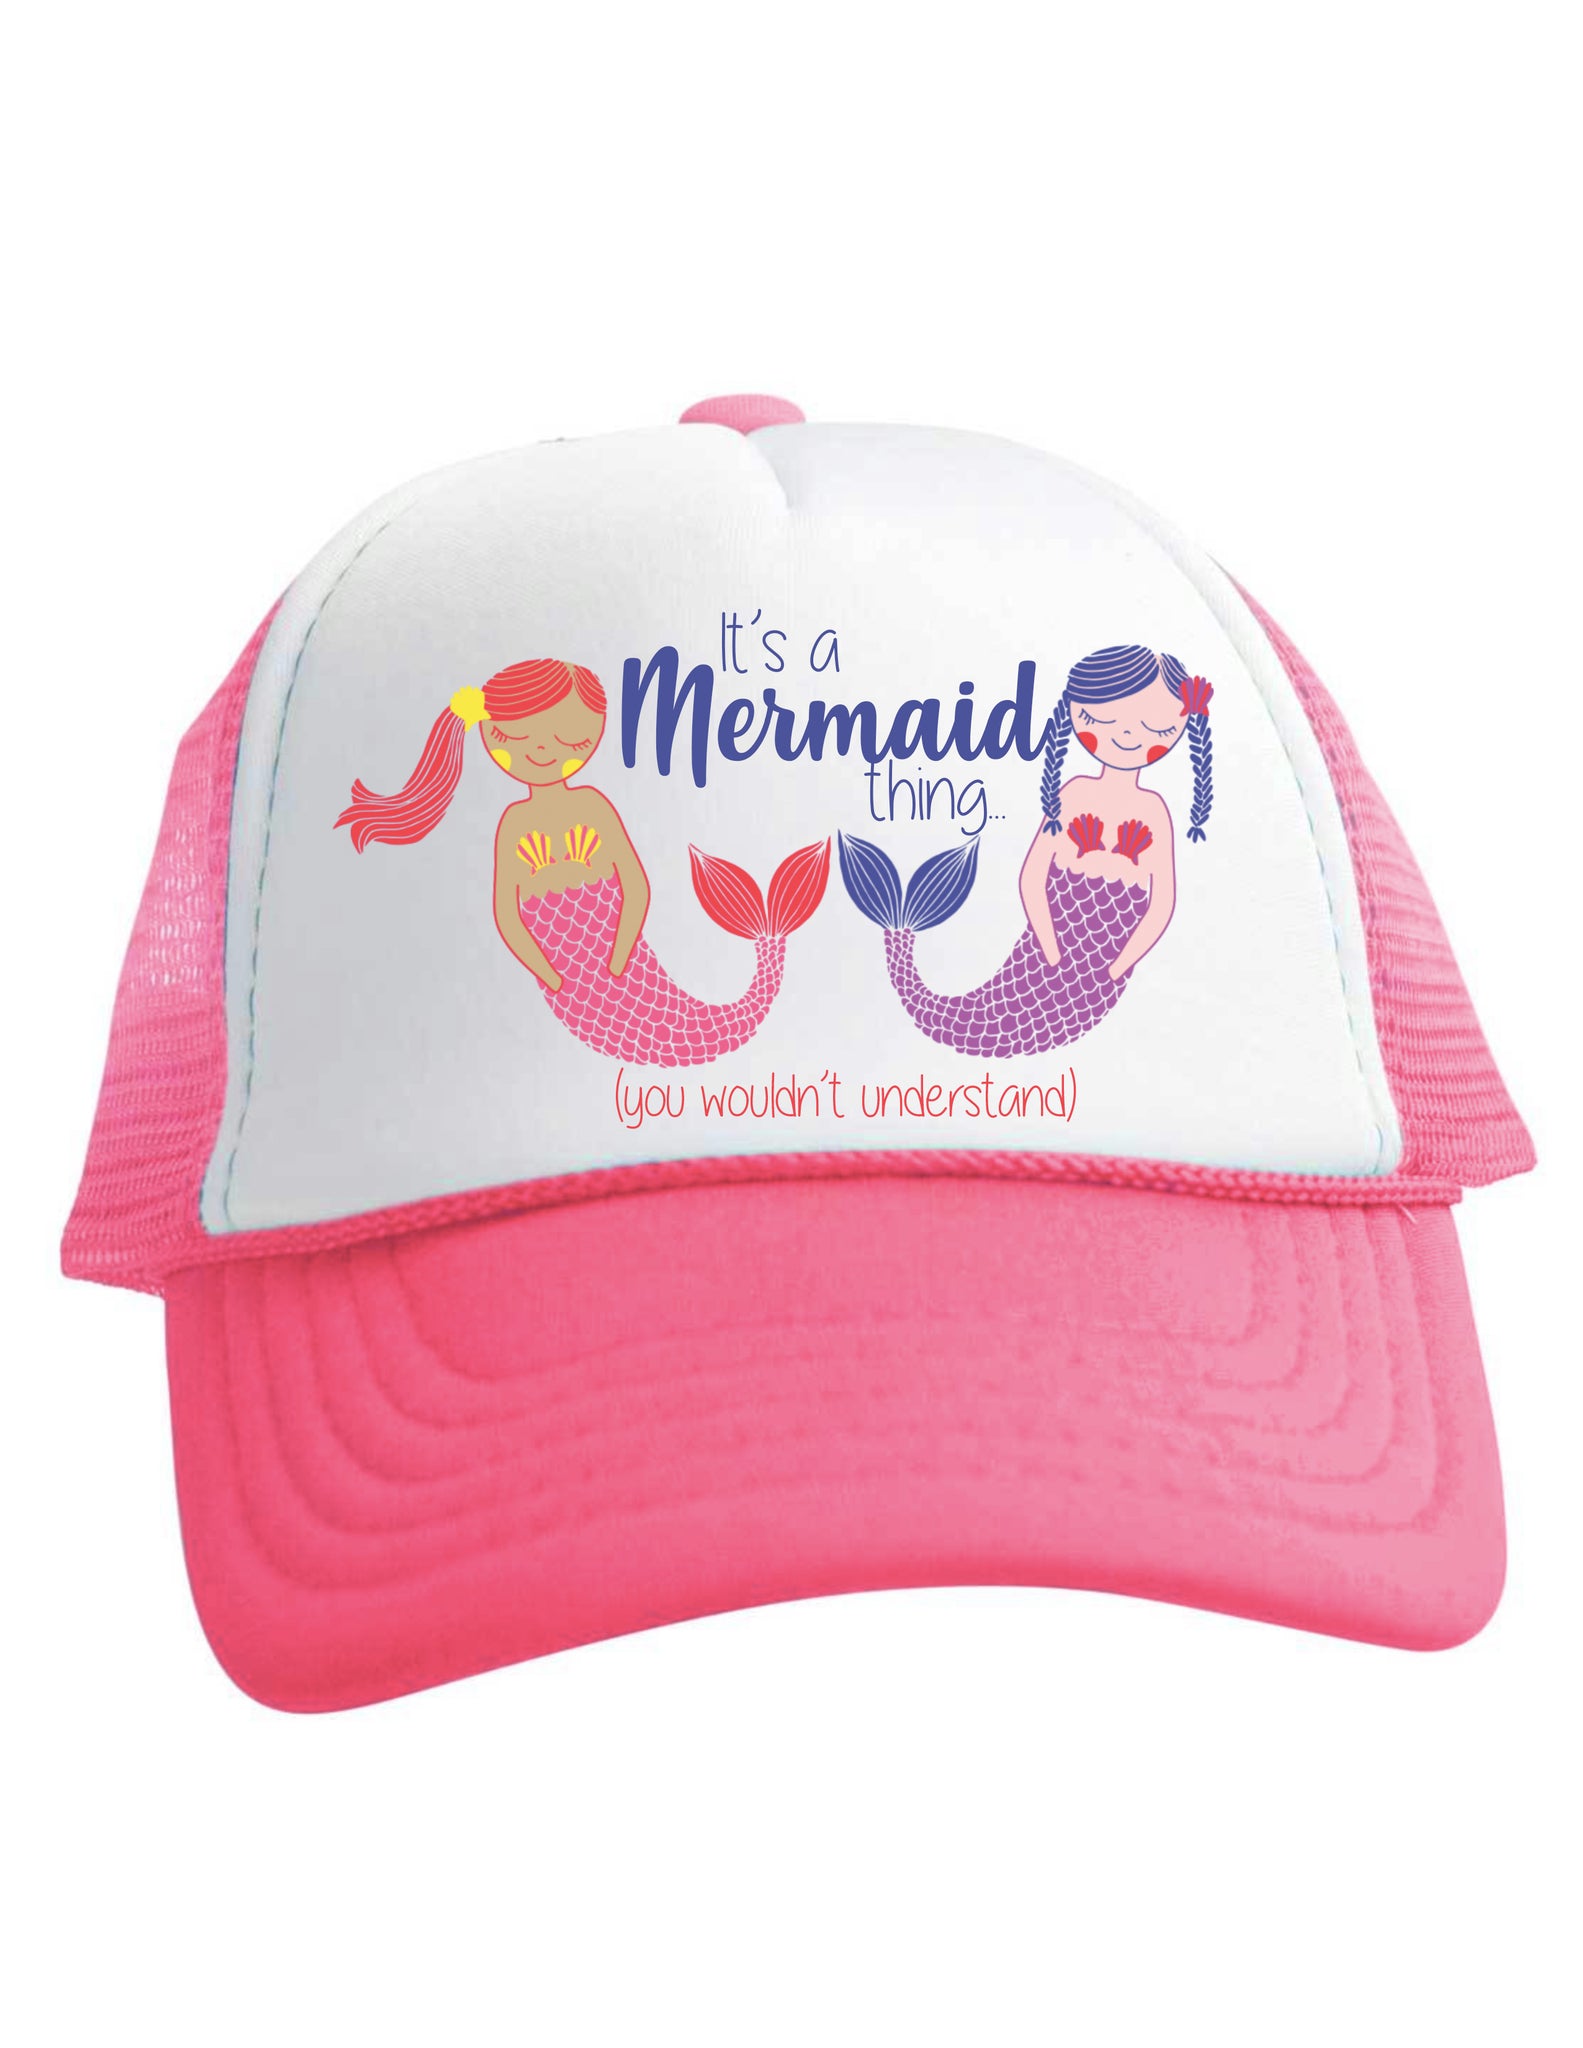 It's a Mermaid Thing You Wouldn't Understand Pink Trucker Hat Girls Baby Toddler Youth Beau and Belle Littles